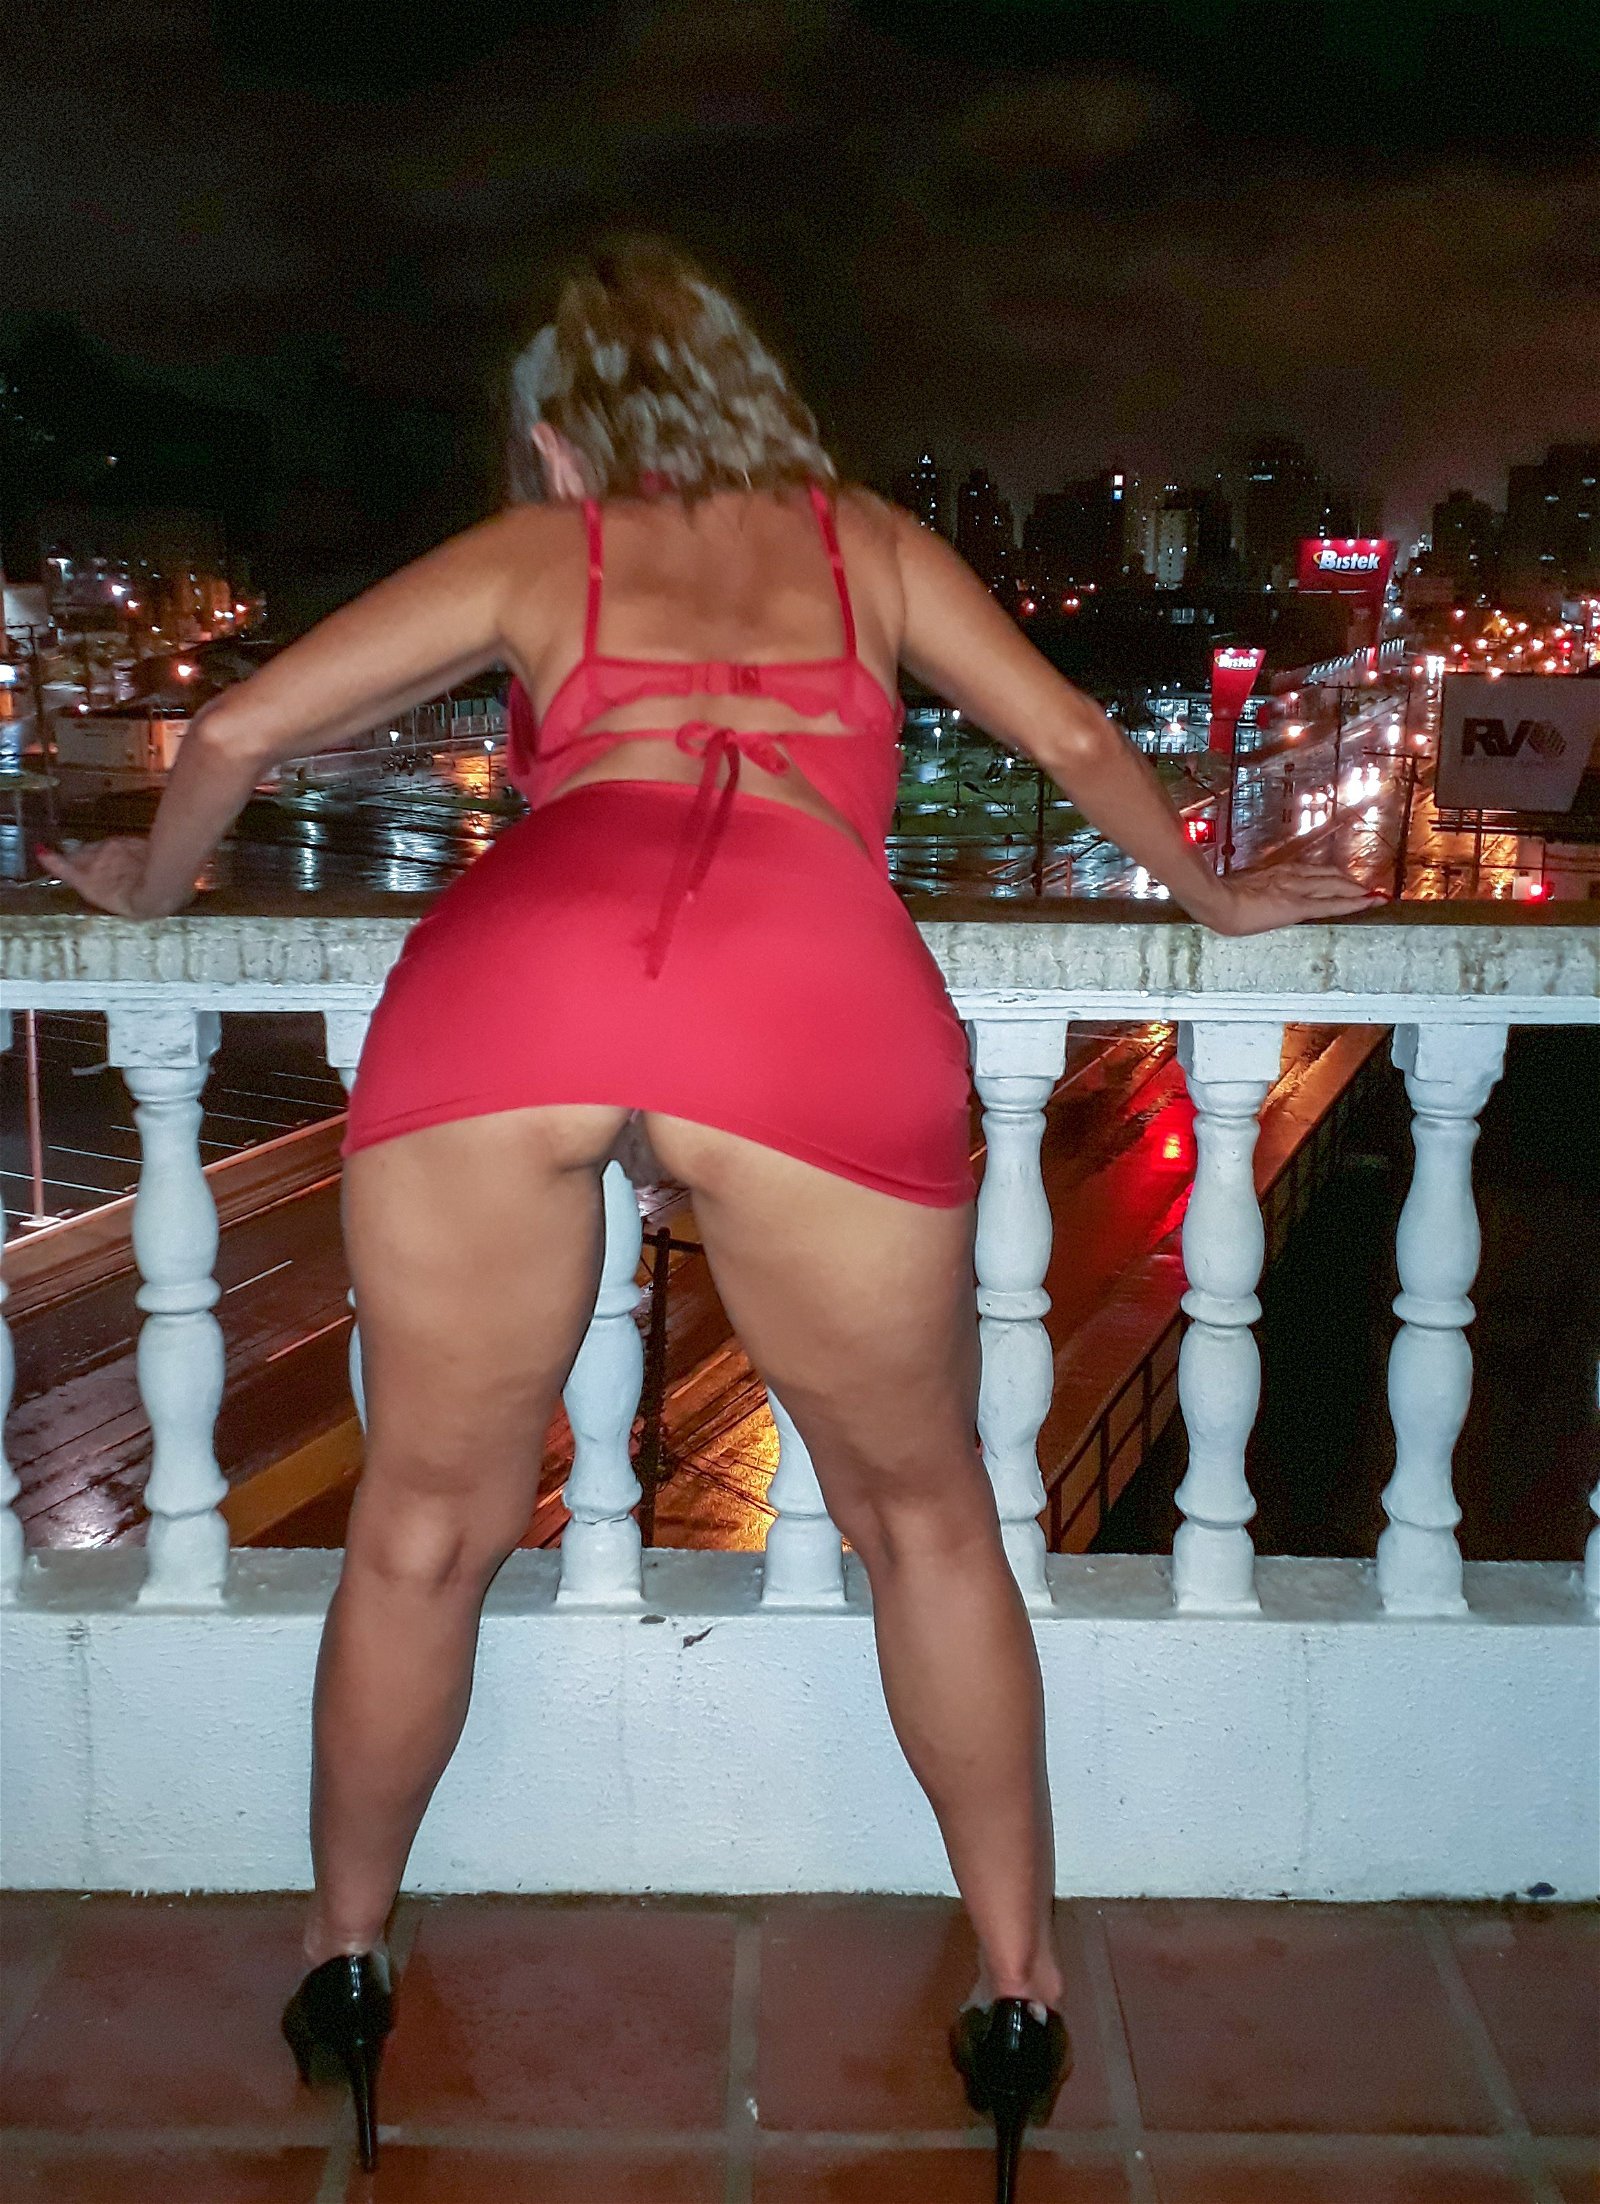 Photo by CristinaeAntony with the username @CristinaeAntony,  February 25, 2019 at 7:11 PM. The post is about the topic WINDOWS, BALCONIES and STAIRS and the text says 'I'm already without panties!
I want and want it NOW !!
Pleasure..'